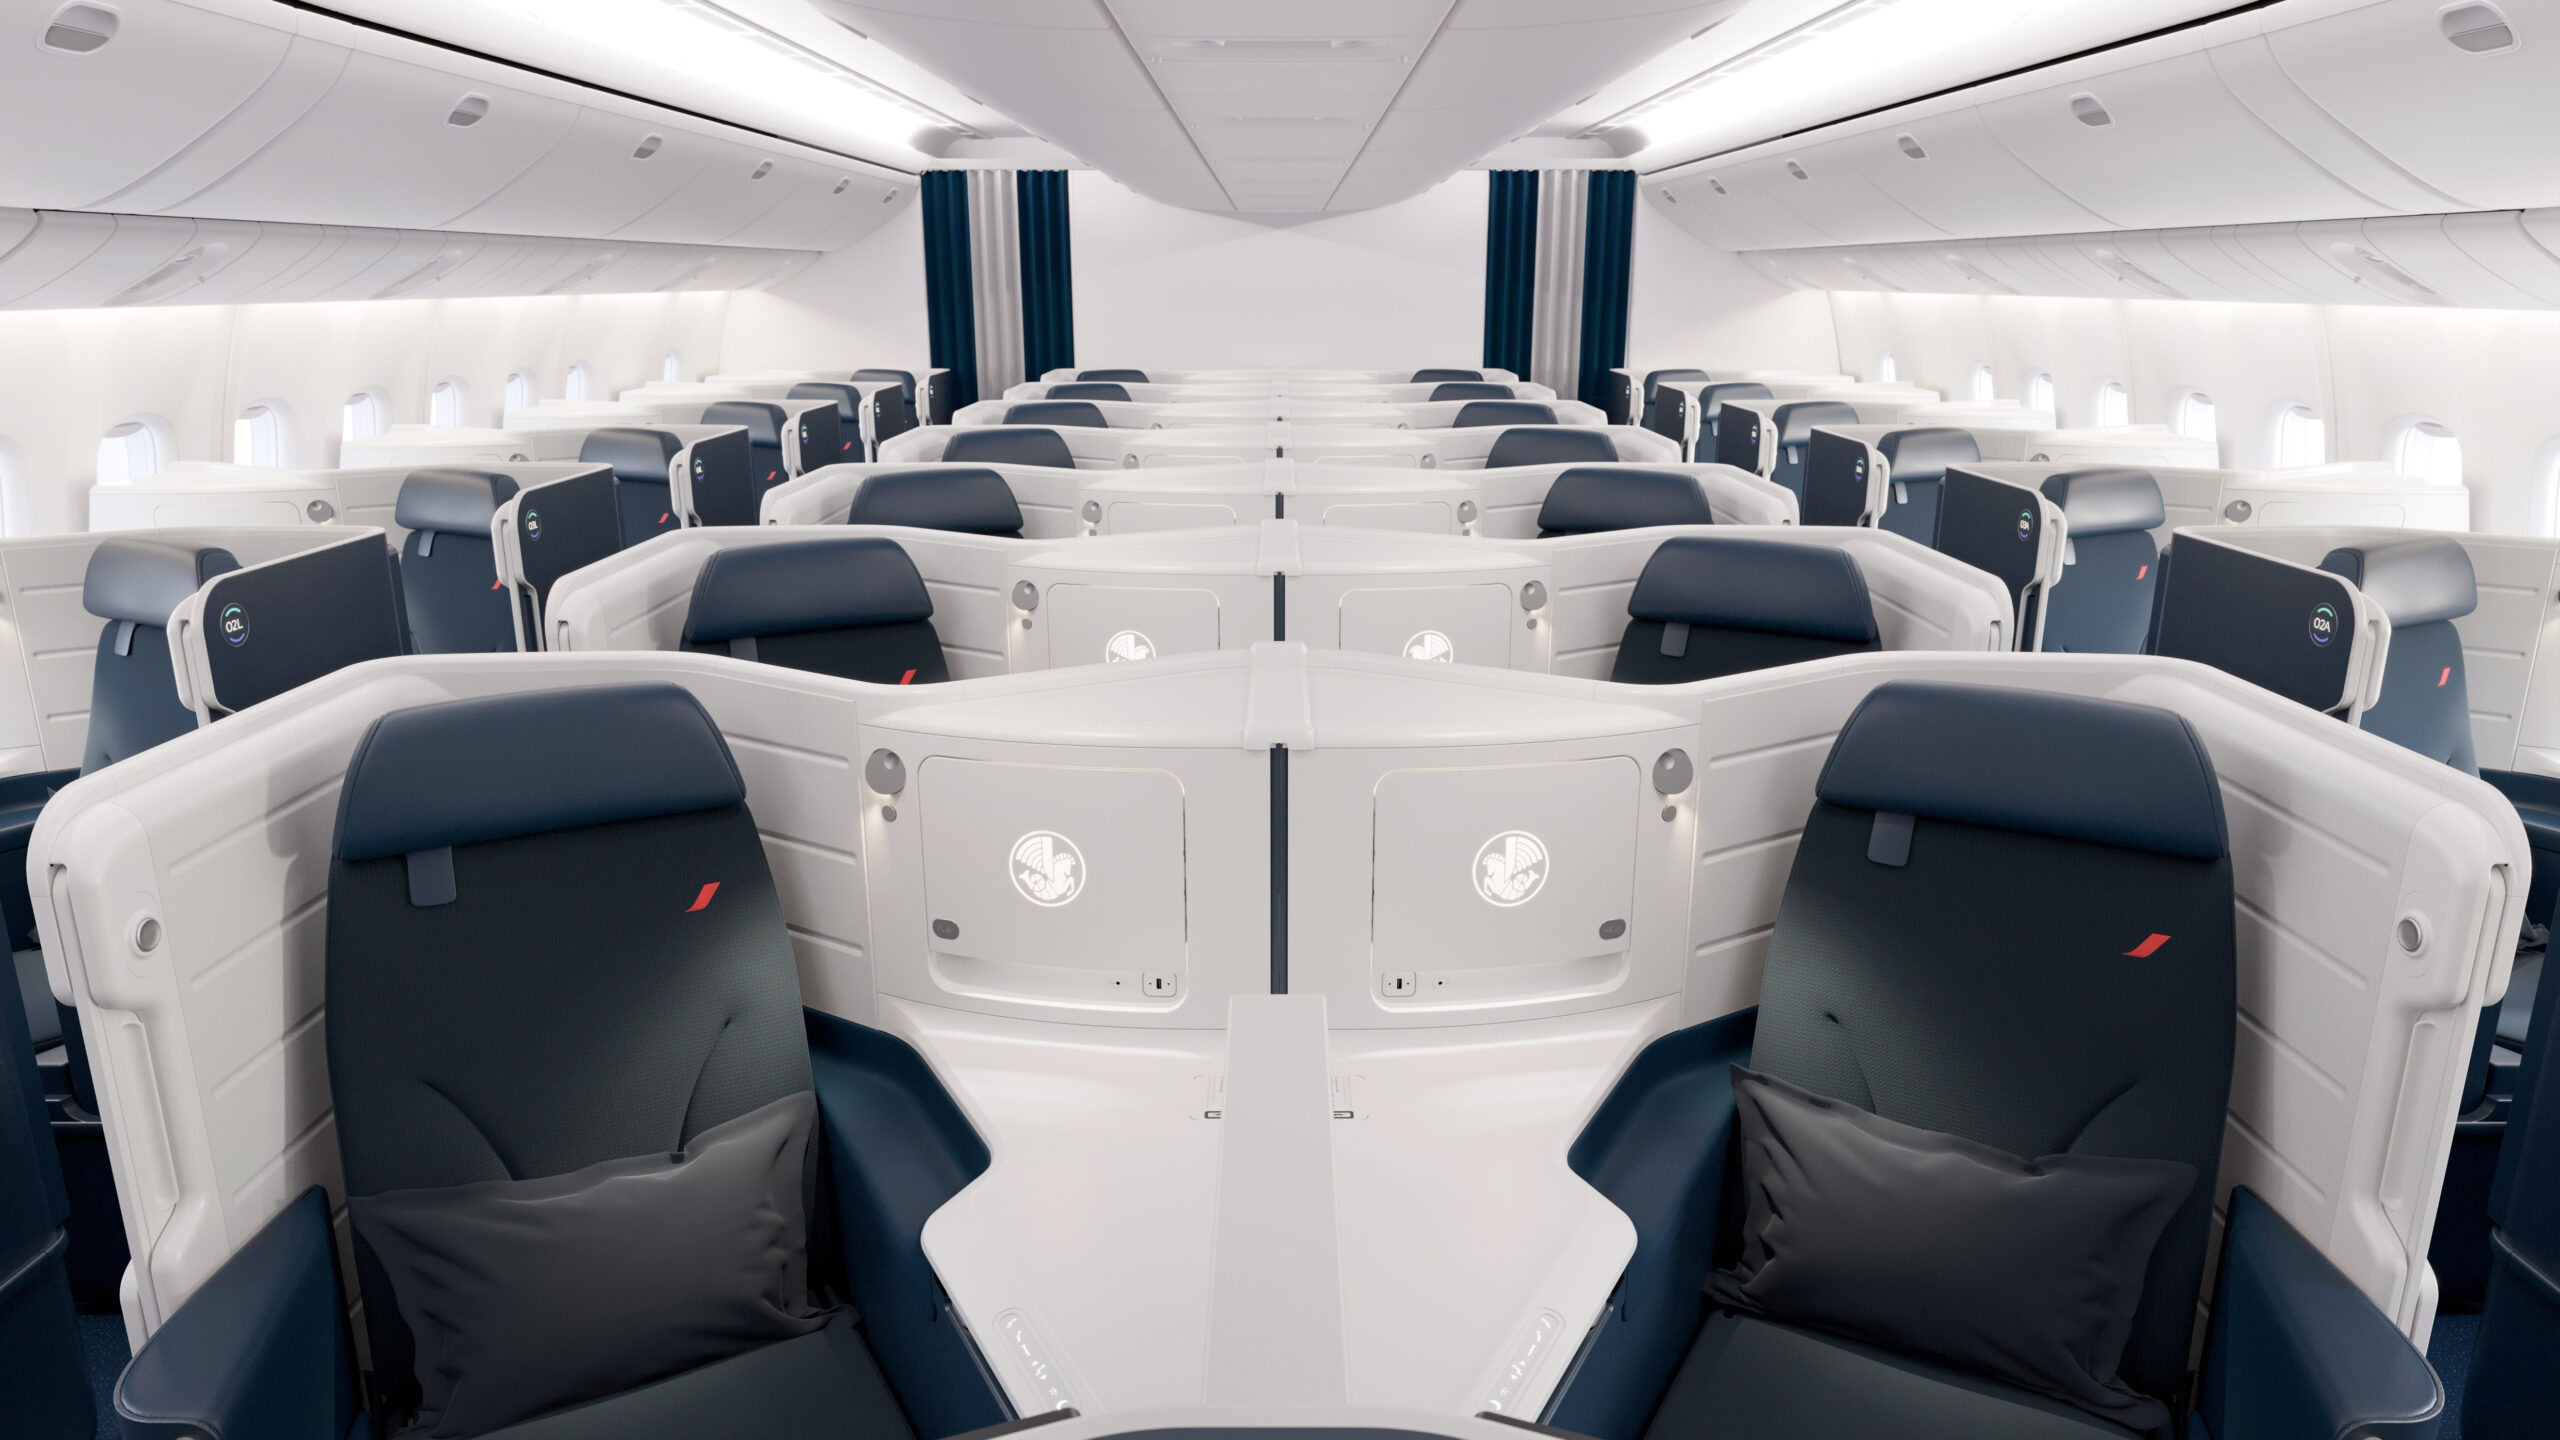 Air France Unveiled New Long-Haul Business Seat With a Door